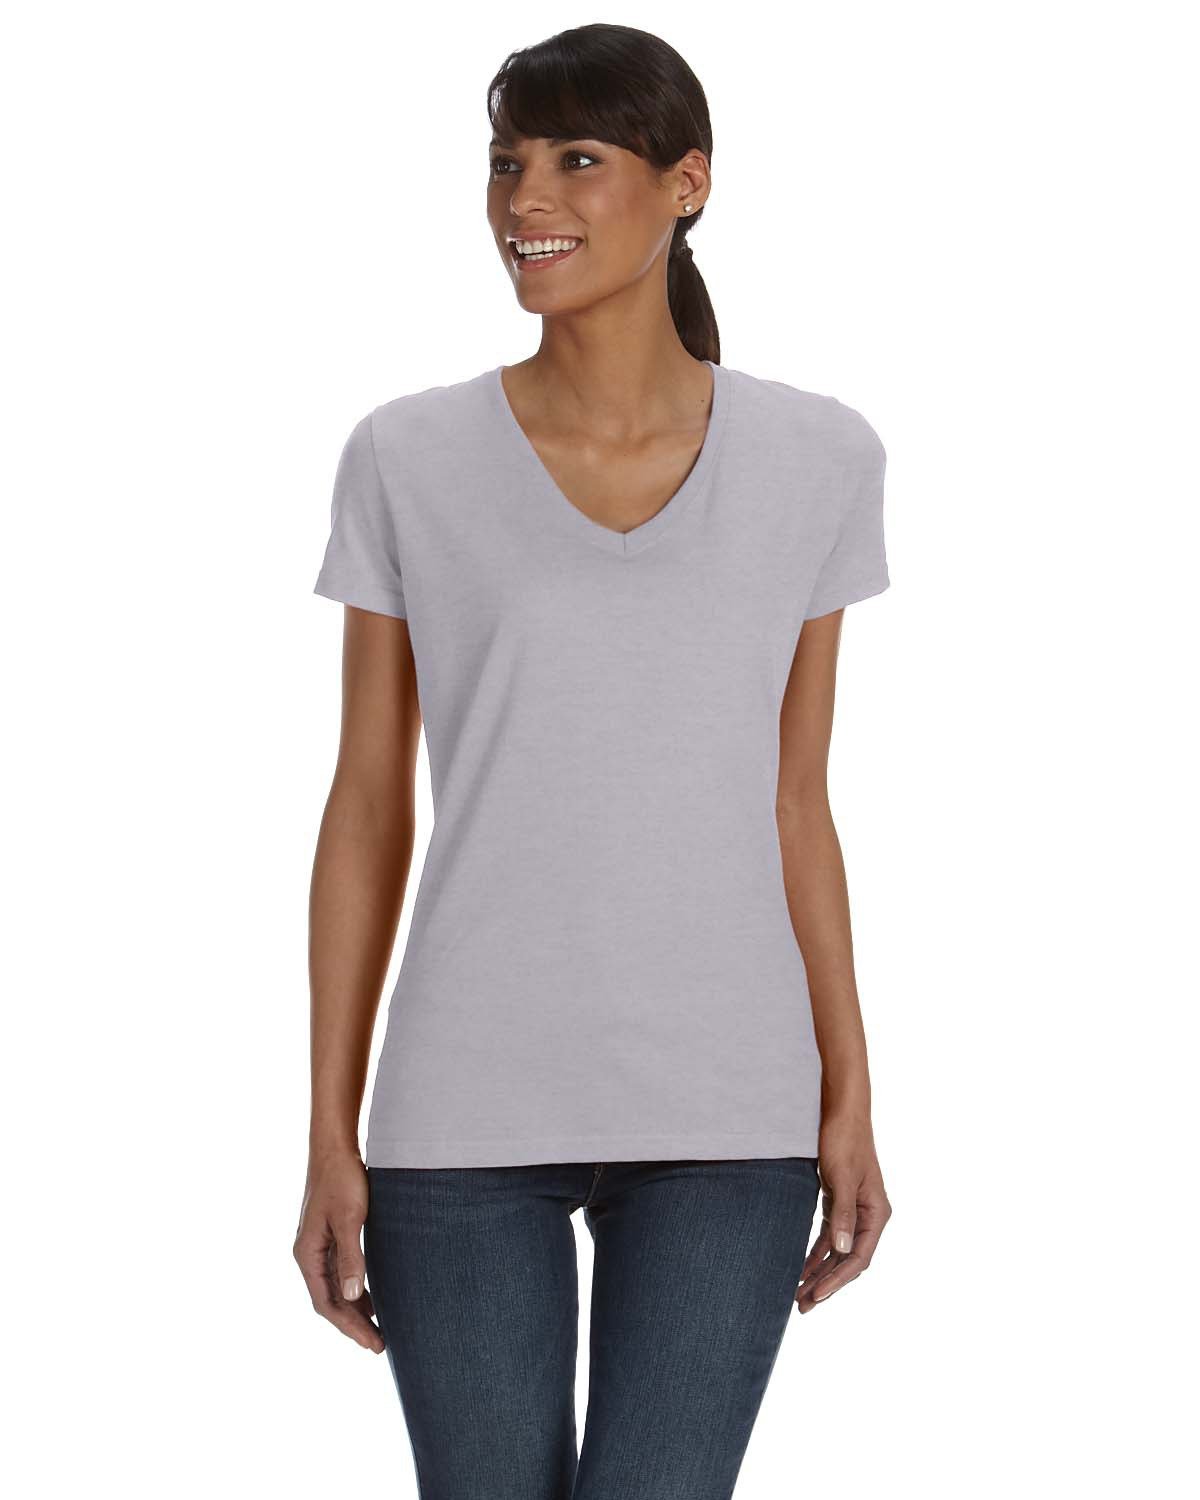 Fruit of the Loom Ladies' HD Cotton™ V-Neck T-Shirt ATHLETIC HEATHER 